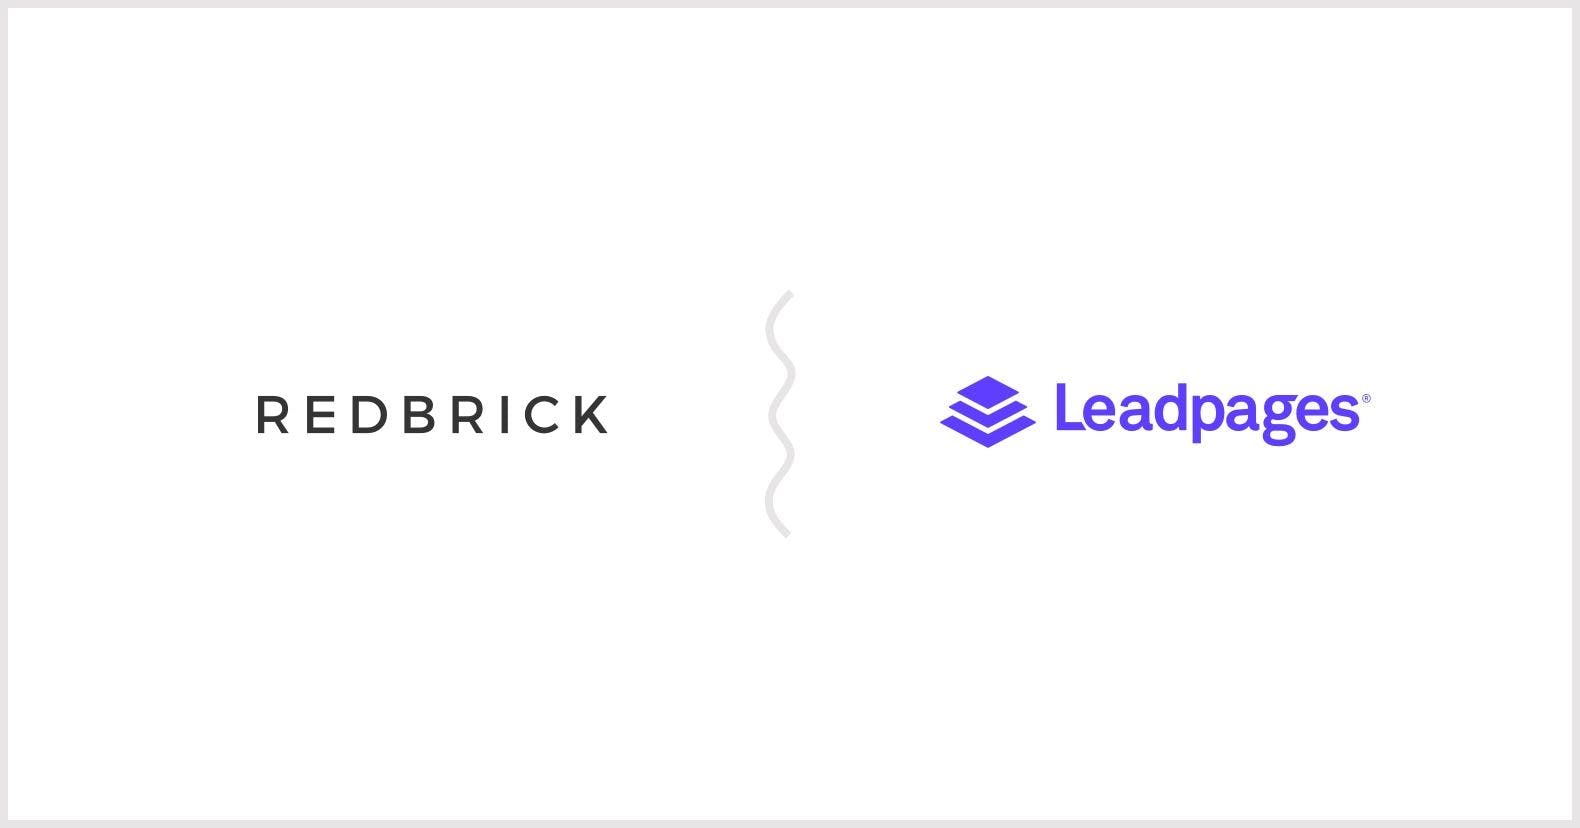 00 Feature Redbrick Leadpages@2x